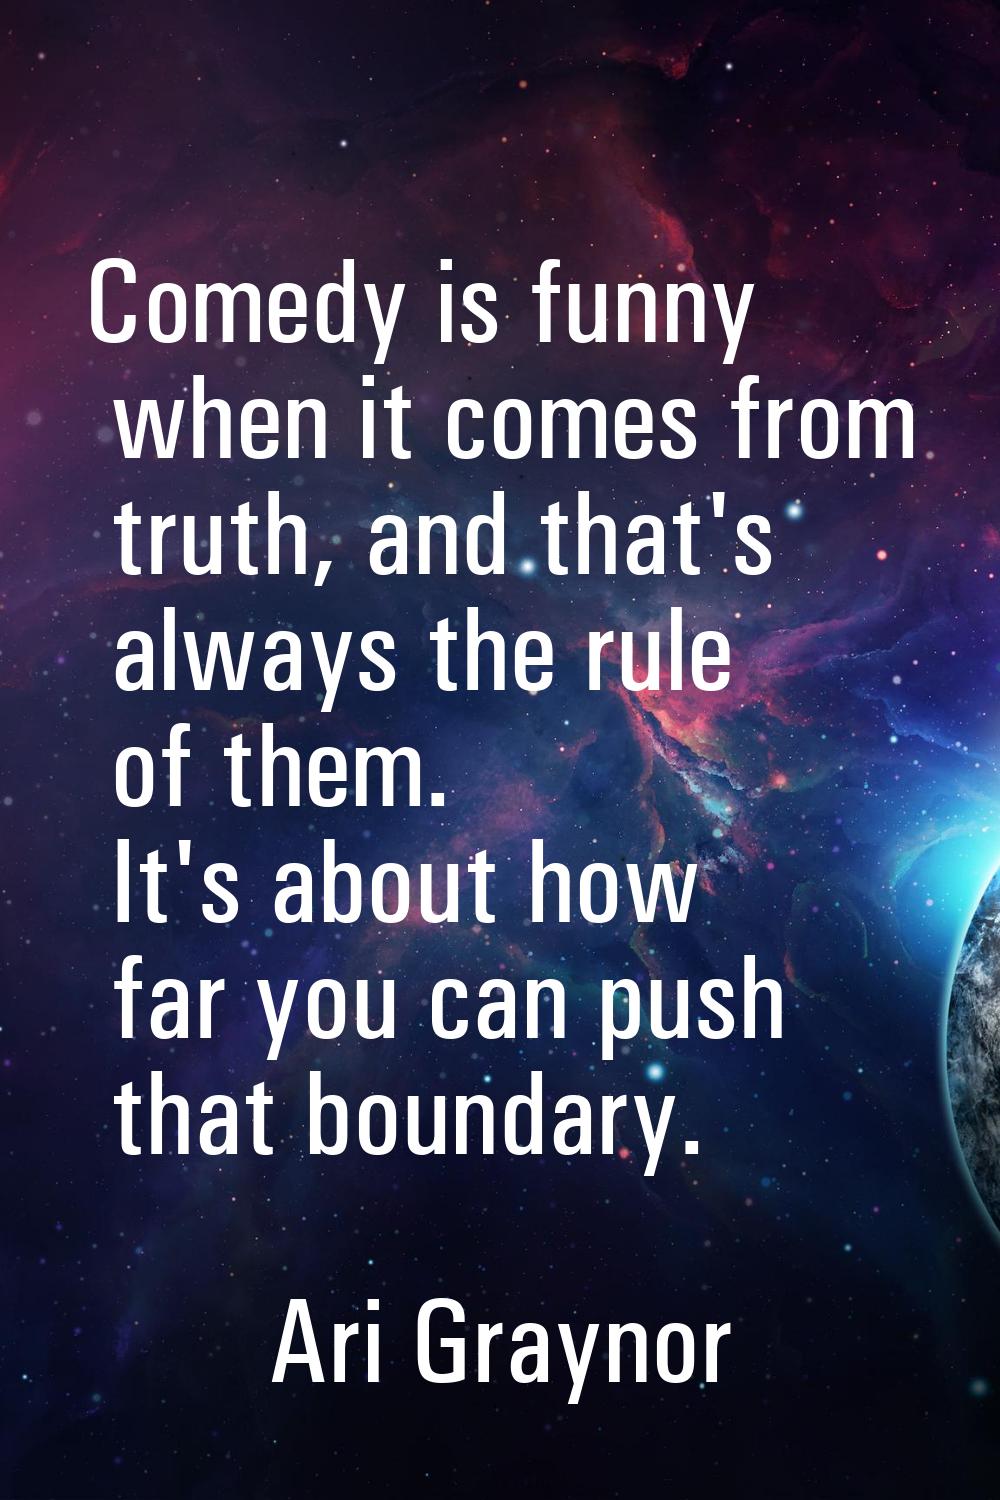 Comedy is funny when it comes from truth, and that's always the rule of them. It's about how far yo